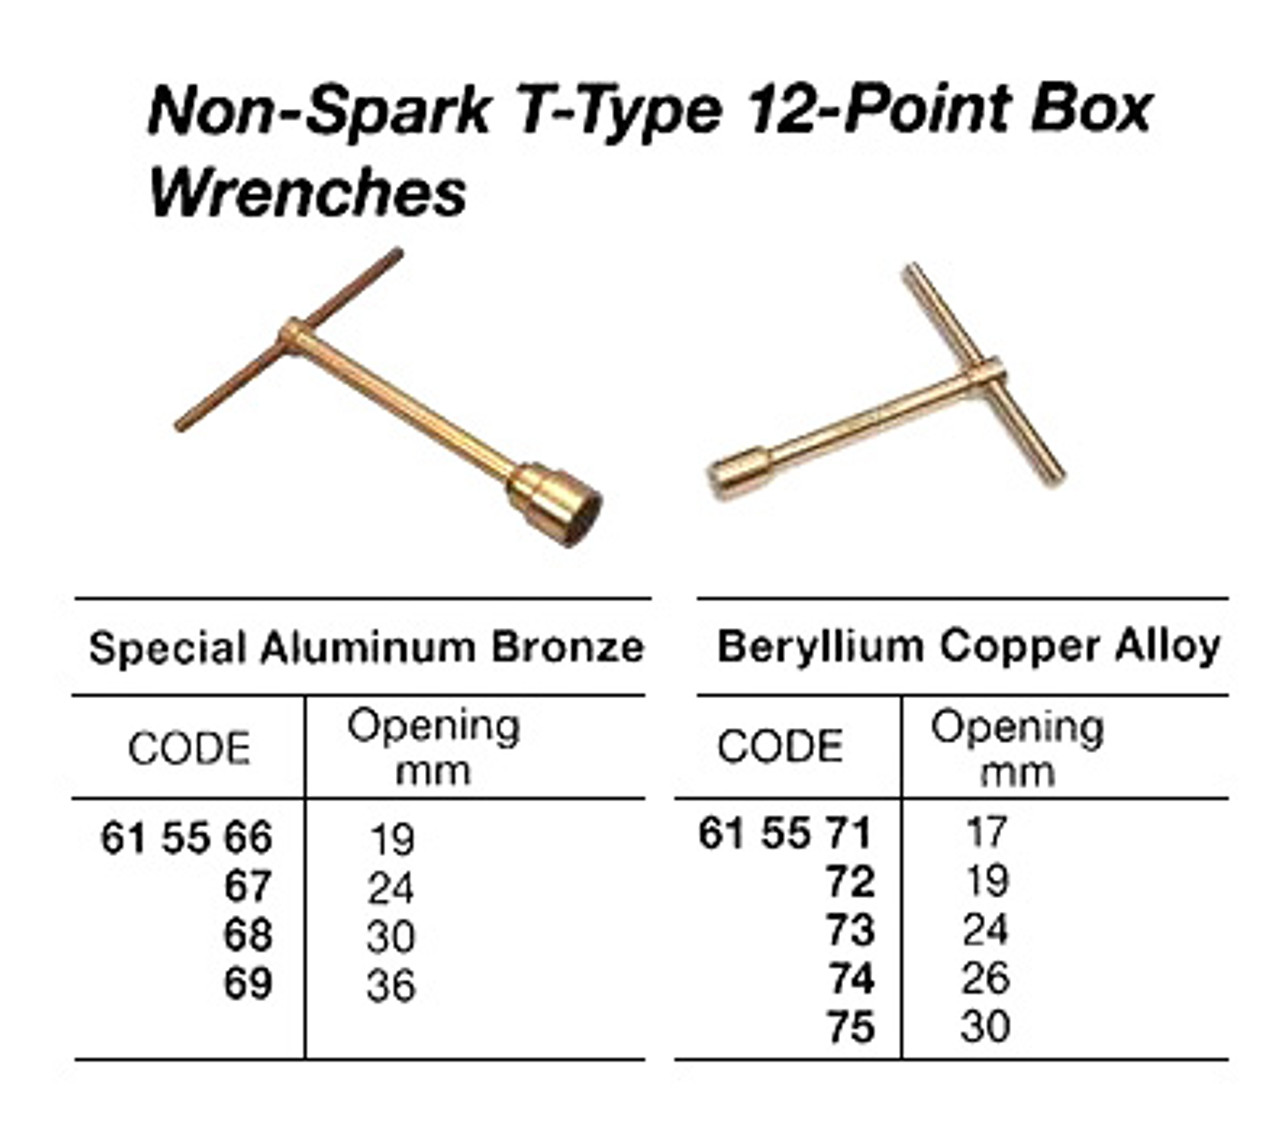 IMPA 615572 WRENCH SOCKET WITH T-HANDLE 19mm ALU-BRONZE NON-SPARK